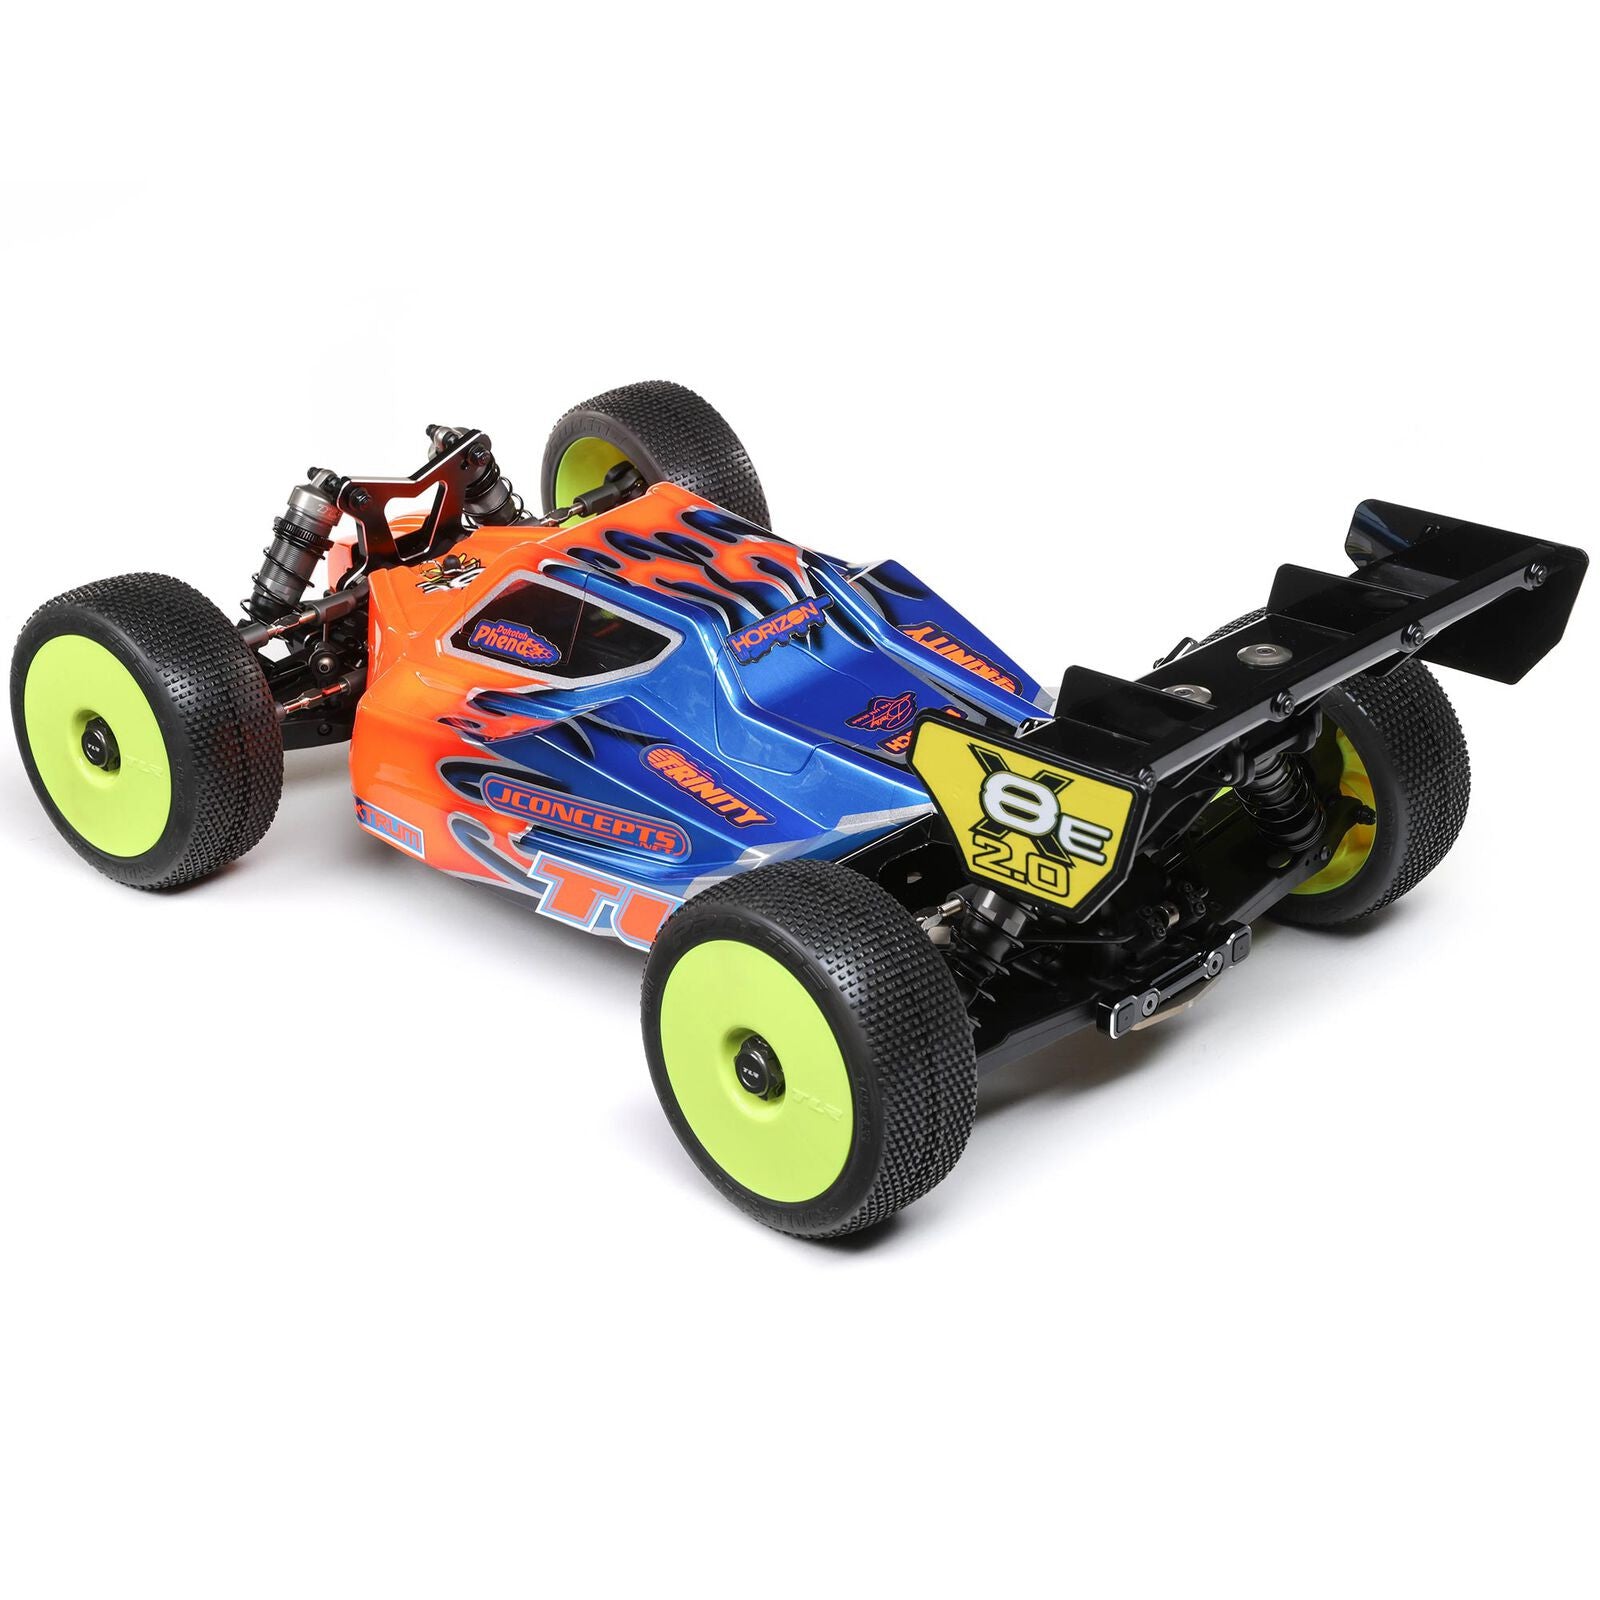 TLR Buggy 8ight -X/XE 2.0 Combo KIT TLR04012